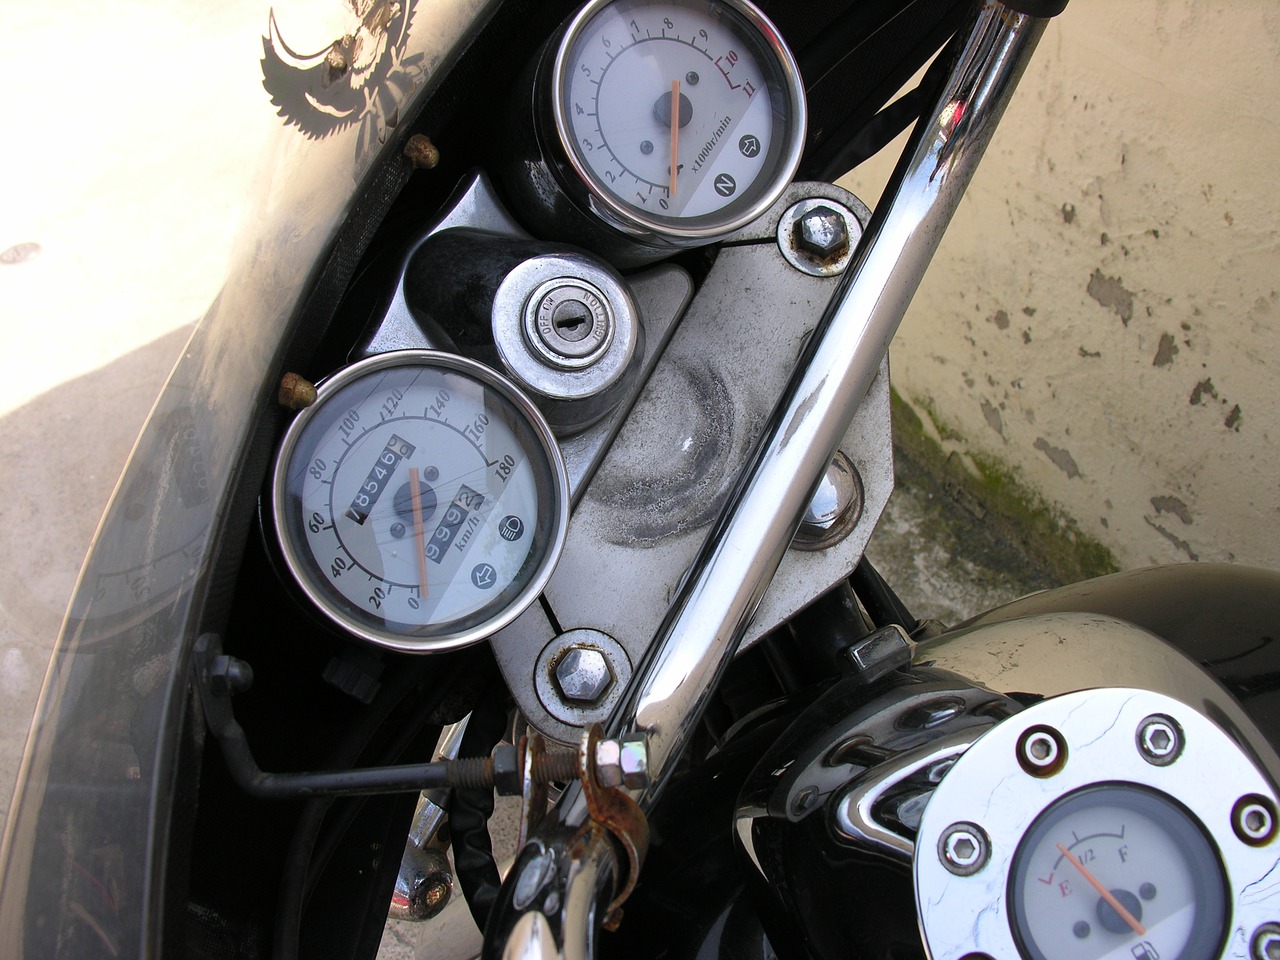 motorcycles the instrument panel machine free photo